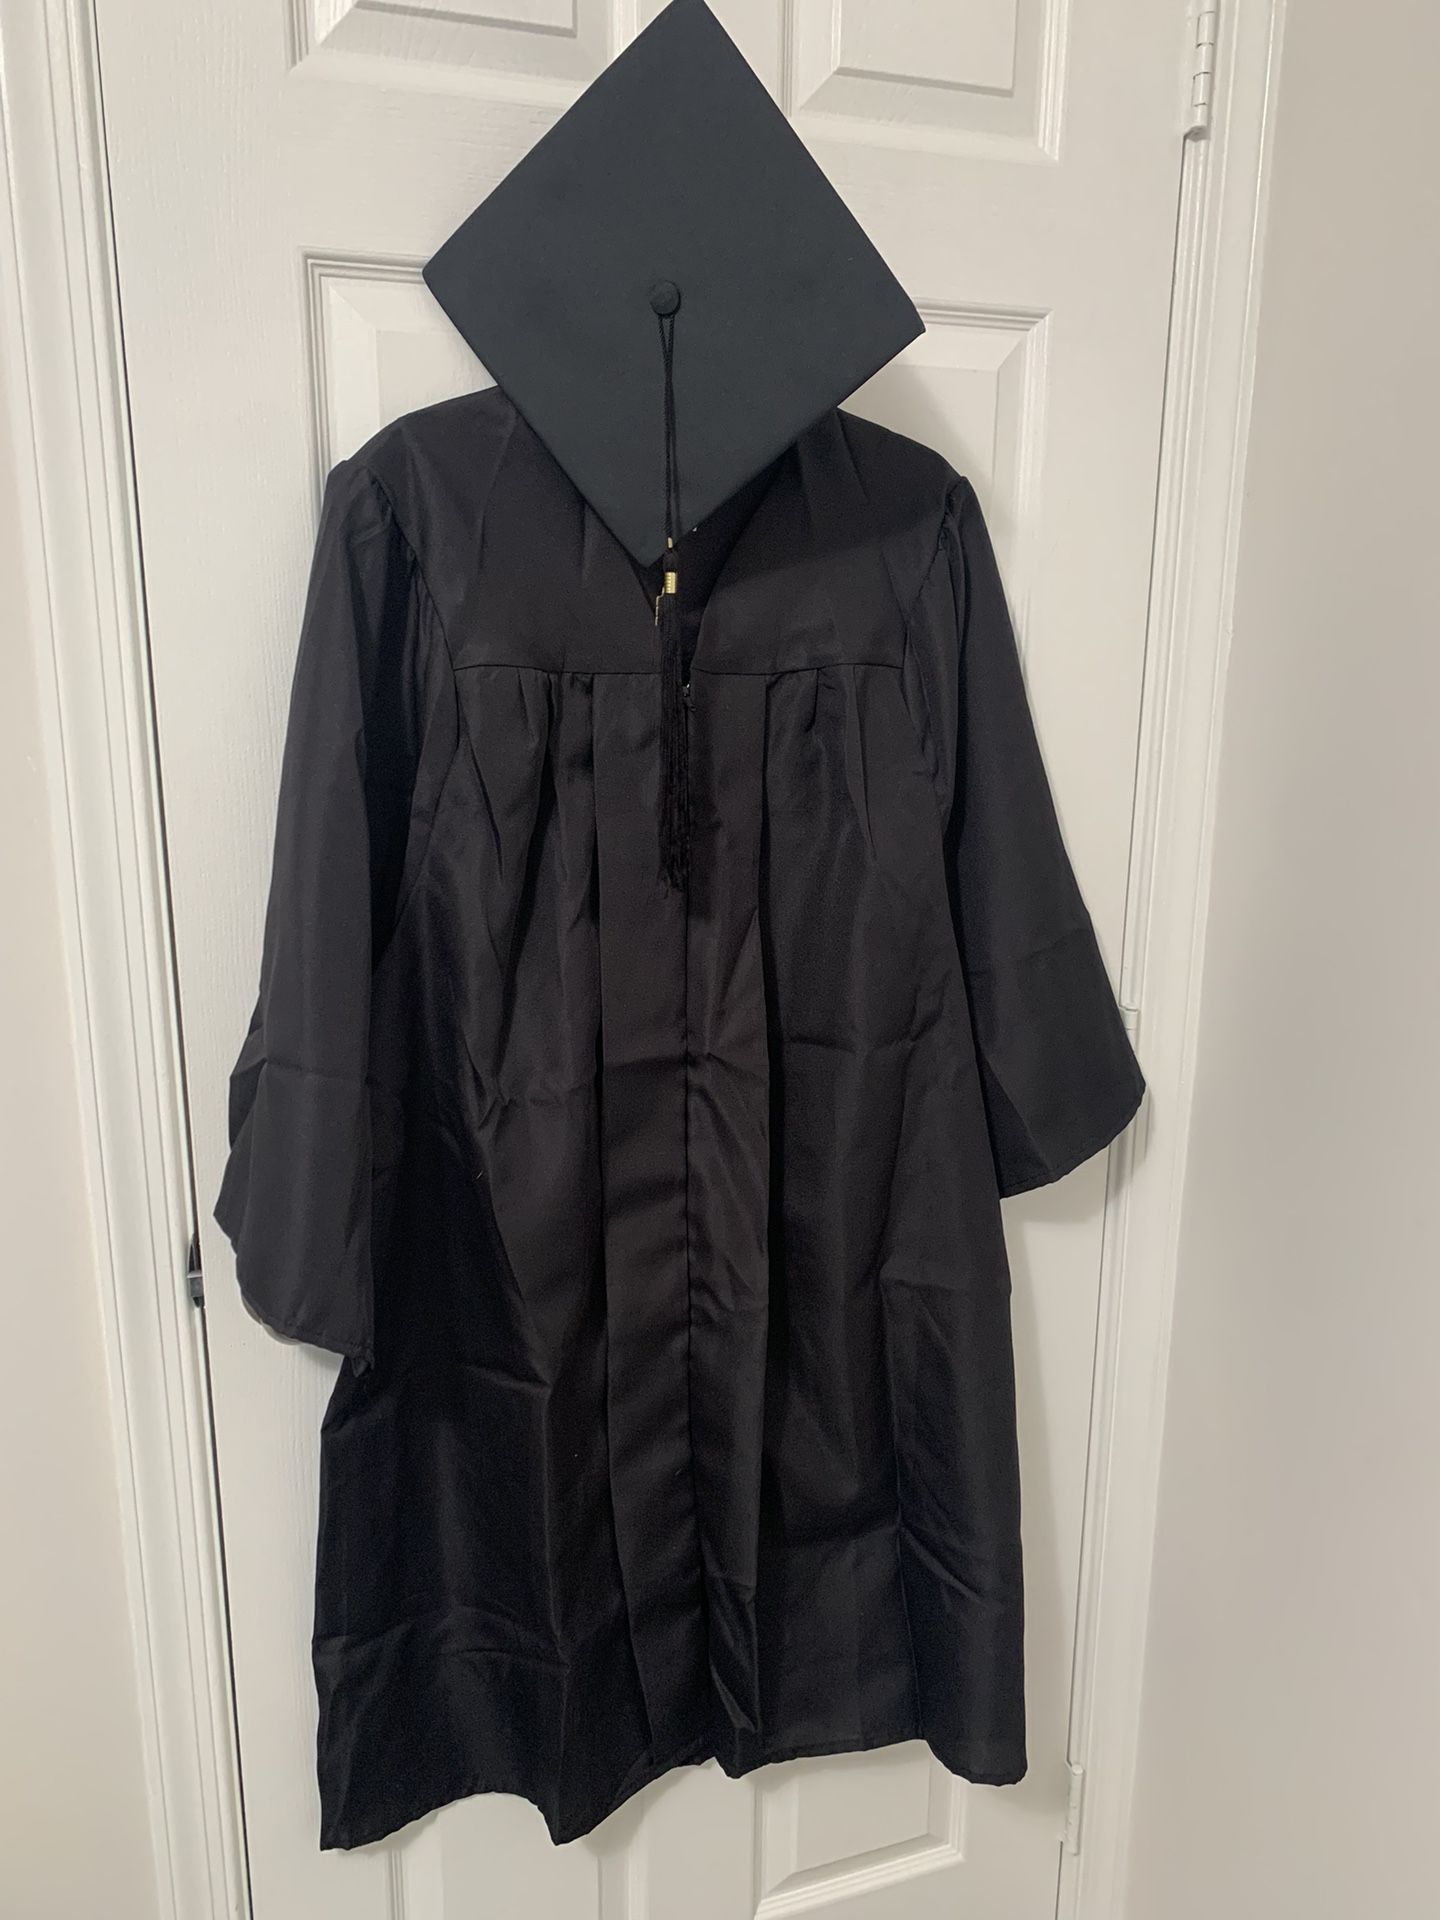 Graduation Gown And Cap